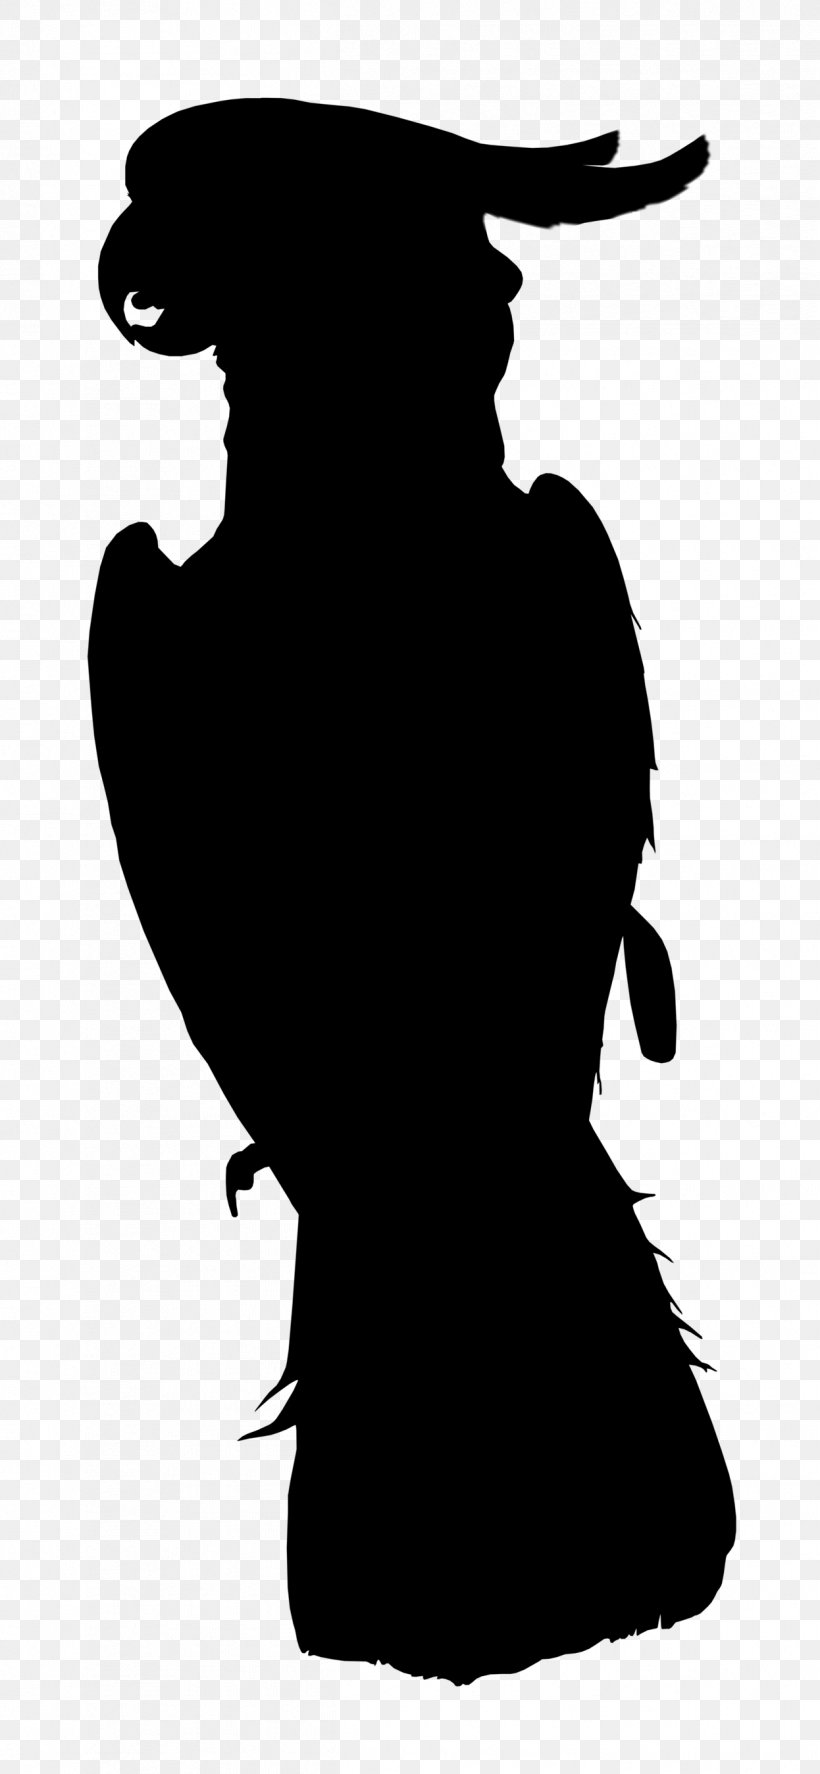 Illustration Clip Art Silhouette Character Fiction, PNG, 1246x2697px, Silhouette, Black M, Blackandwhite, Character, Fiction Download Free